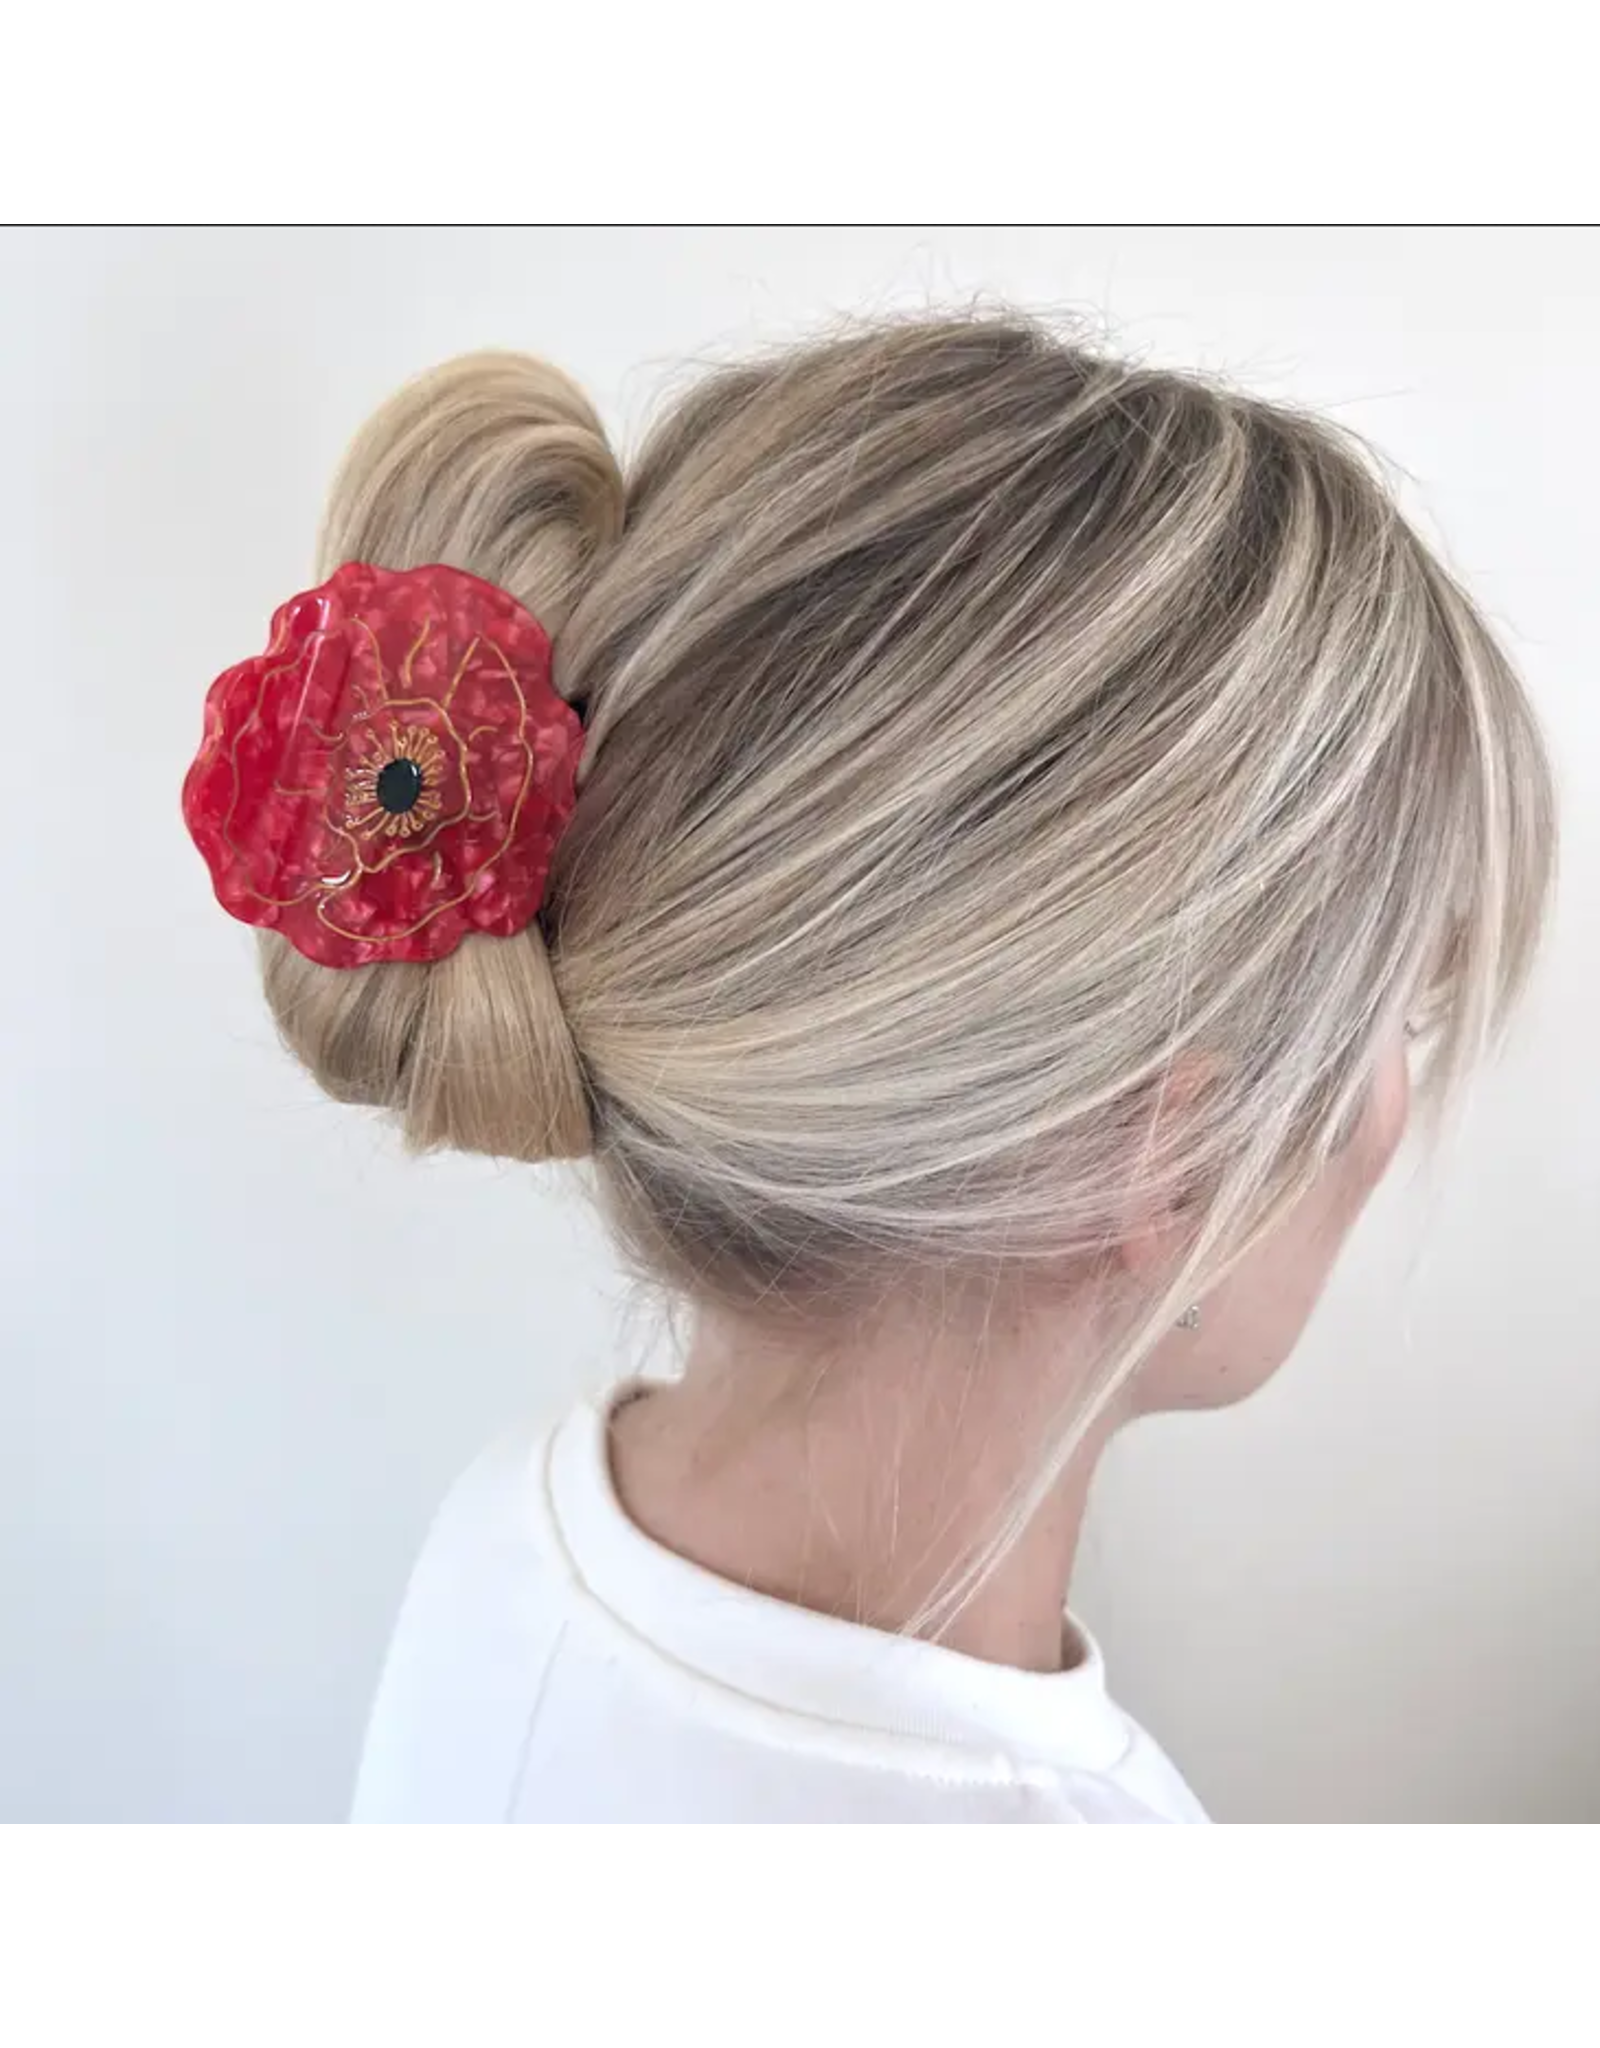 Solar Eclipse Hand-Painted Red Poppy Hair Clip